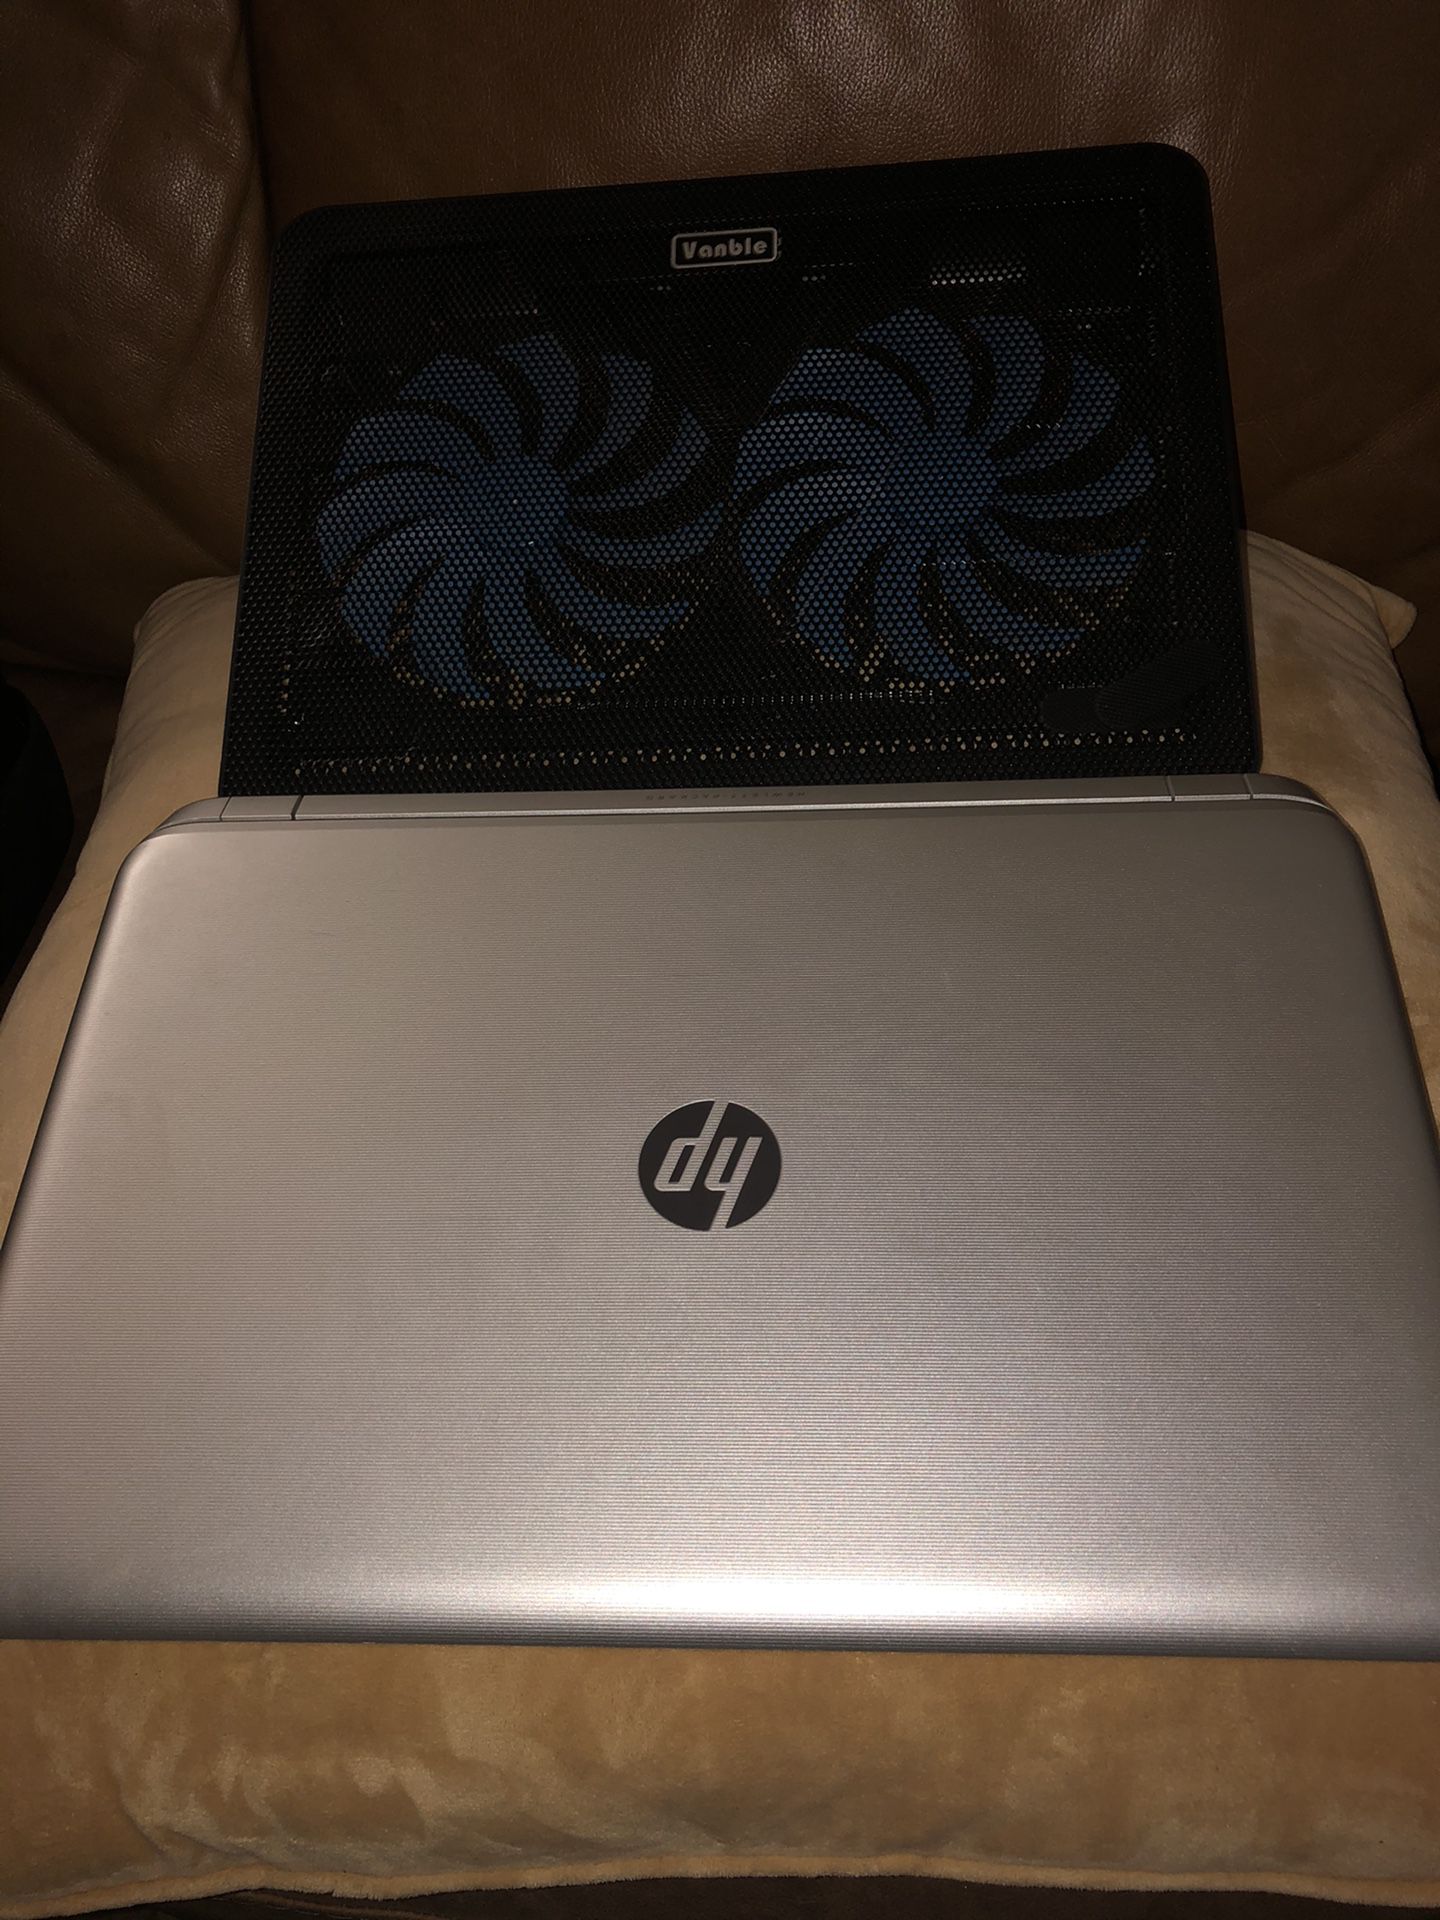 HP Pavilion Touch Laptop w/ cooling fan & Backpack!